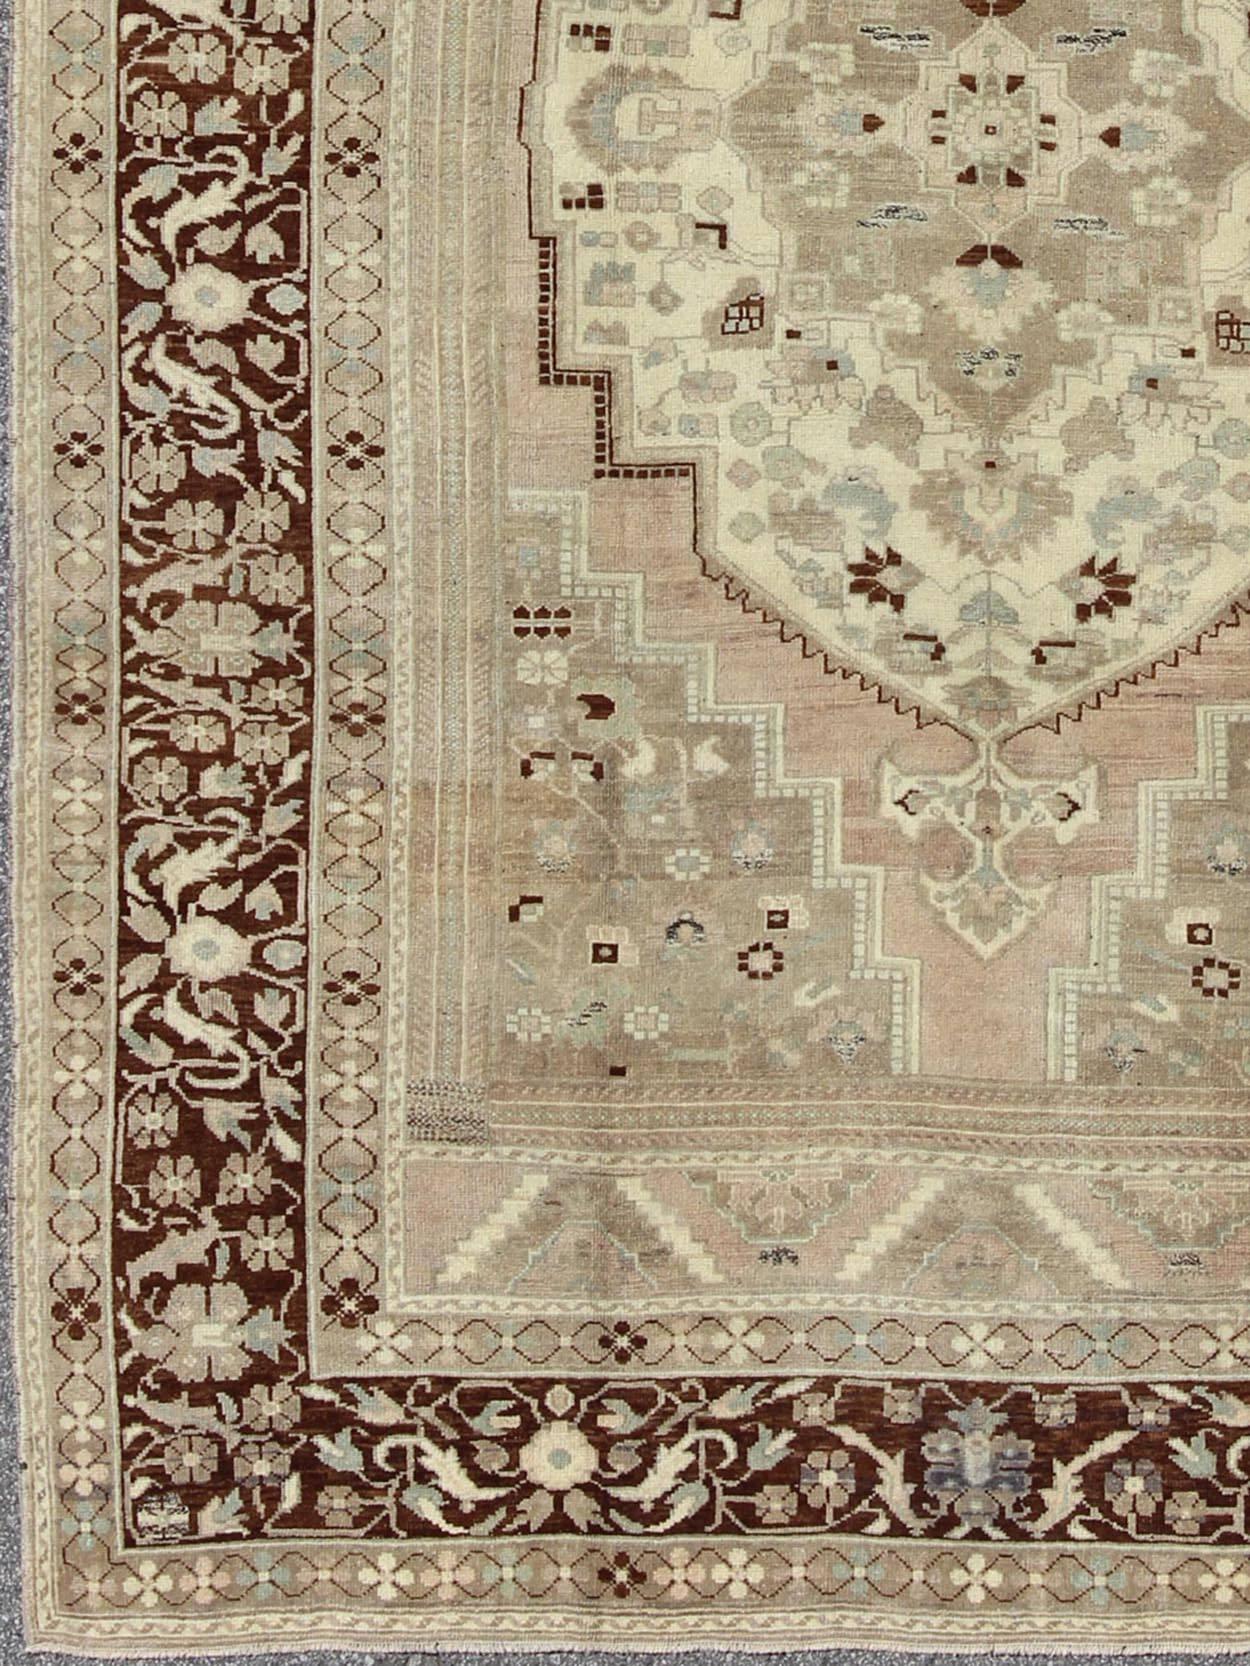 Measures: 7'5 x 11'4.
This rug showcases a large central medallion surrounded by a gentle pink color. A cream medallion is filled with floral designs of pale blue, light green, and shades of neutral browns. The chocolate brown outlines in the